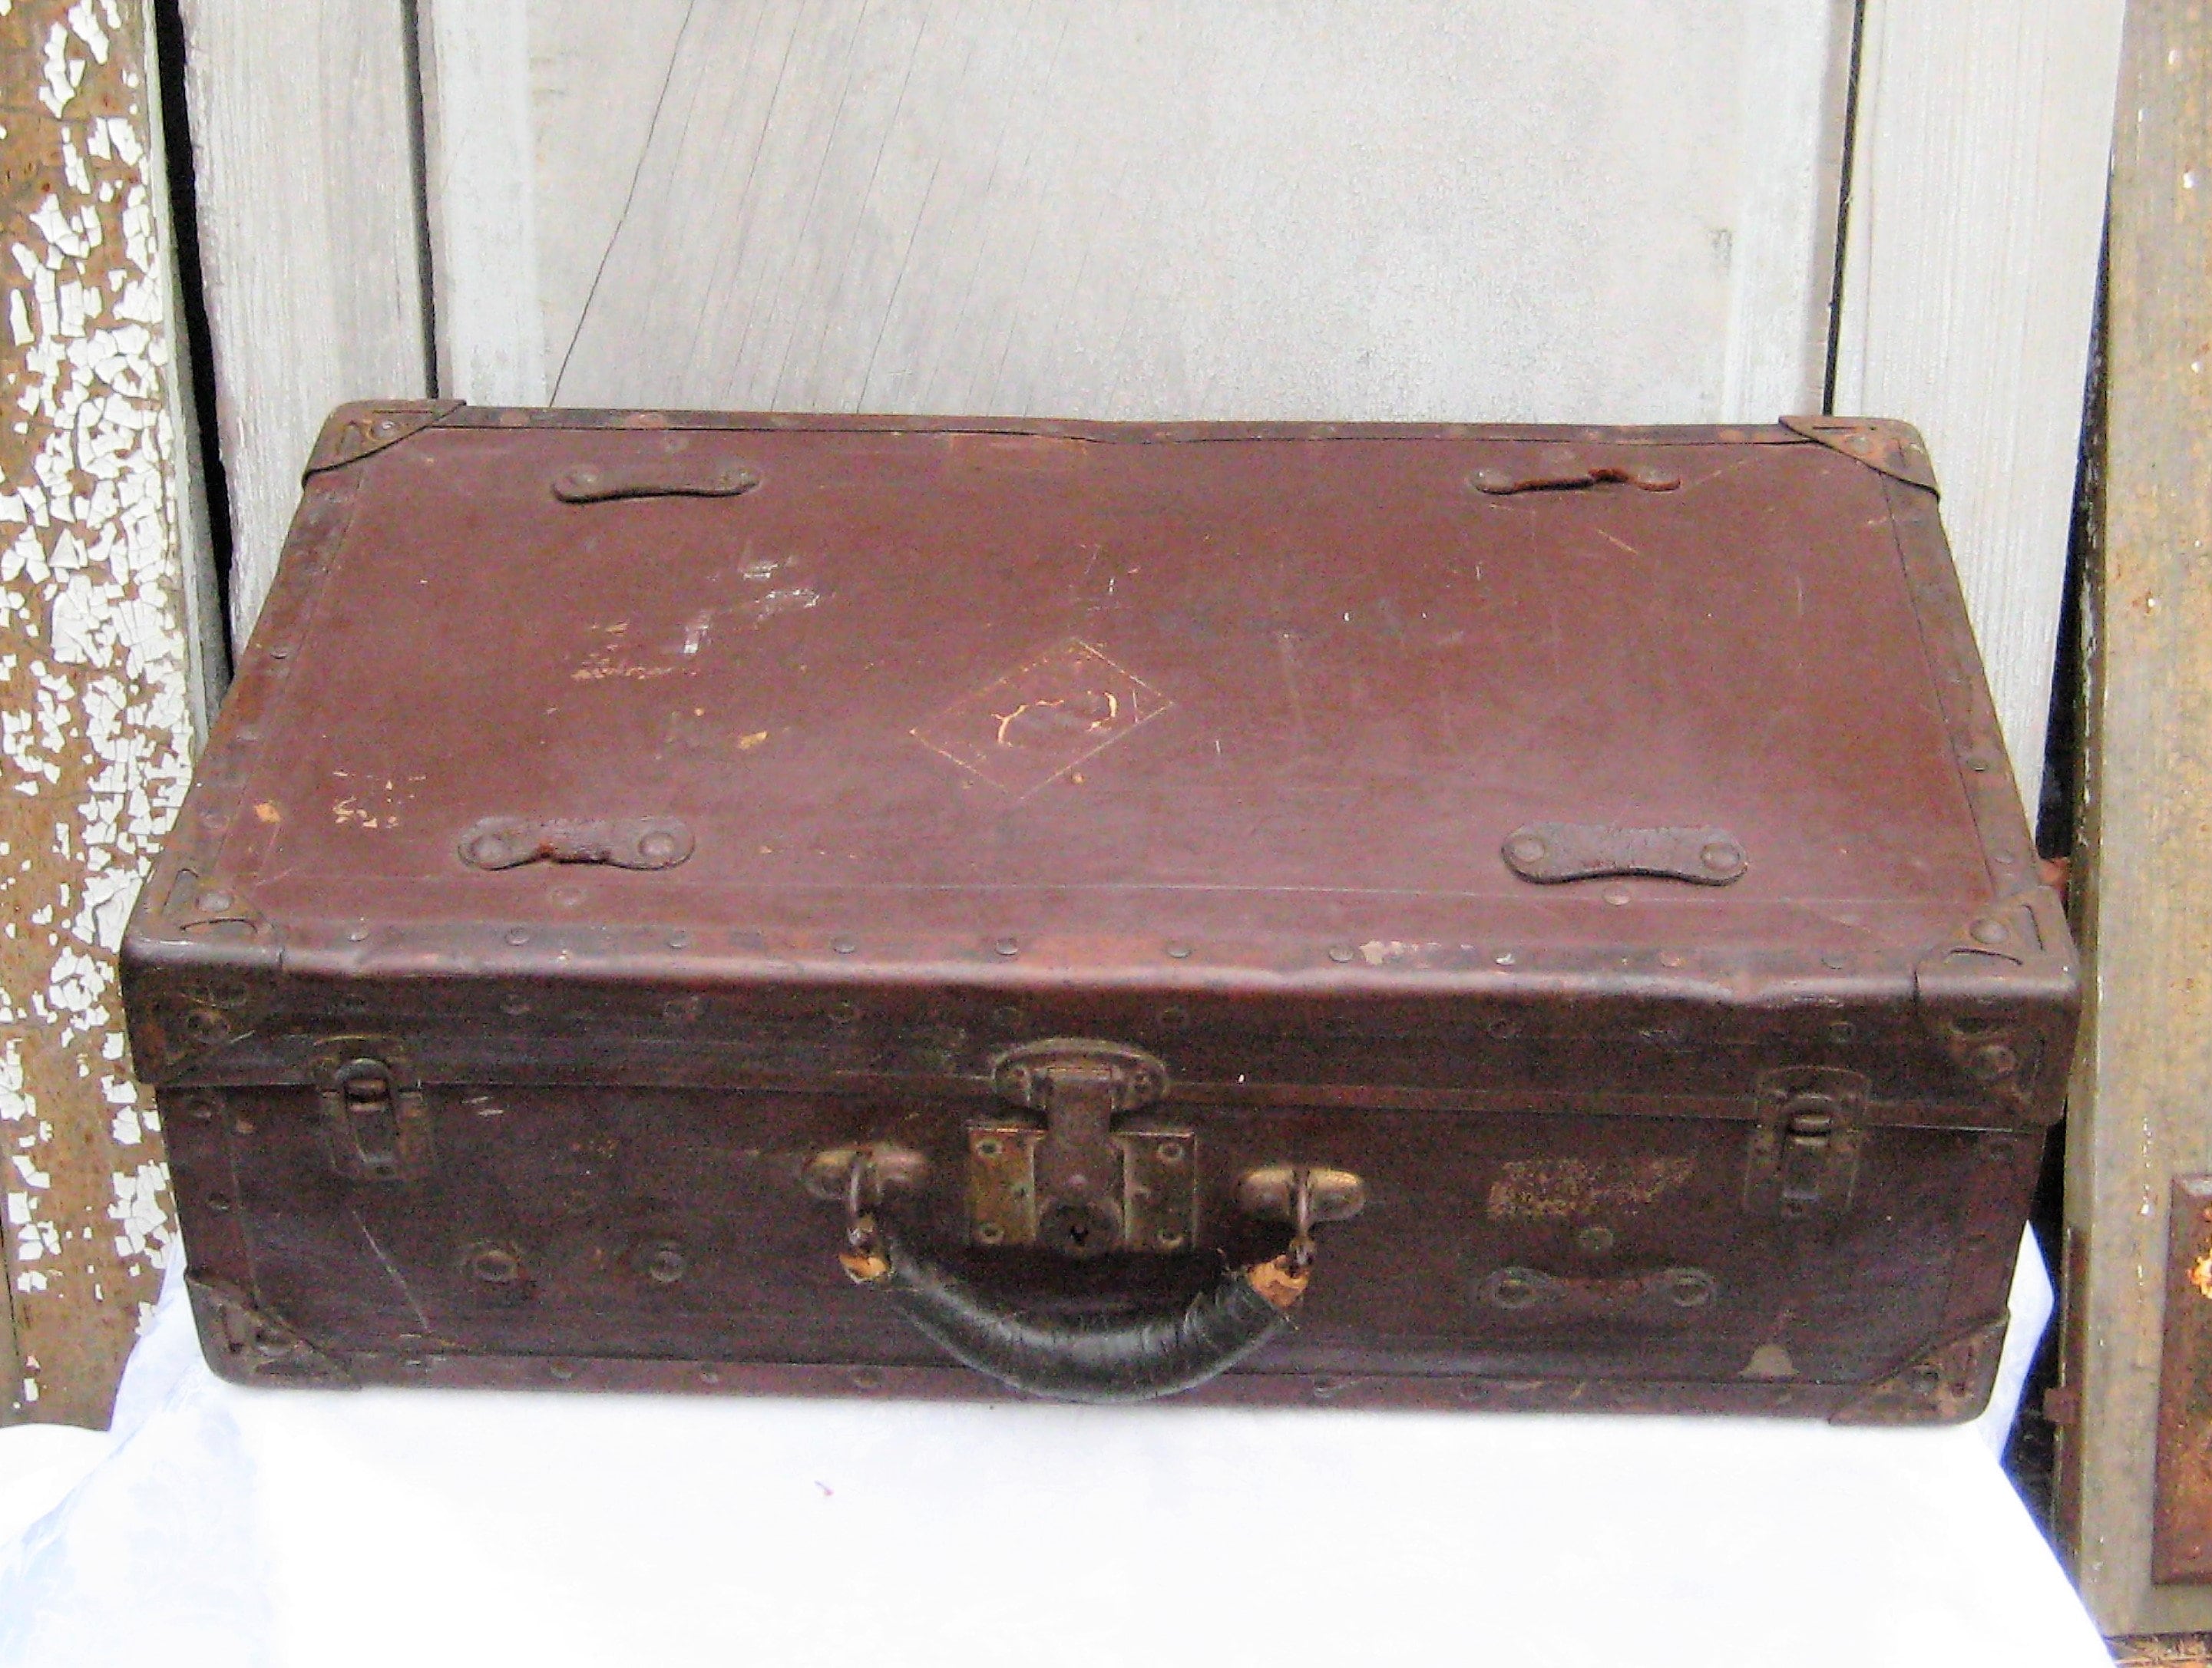 Antique 1800's leather travel trunk suitcase